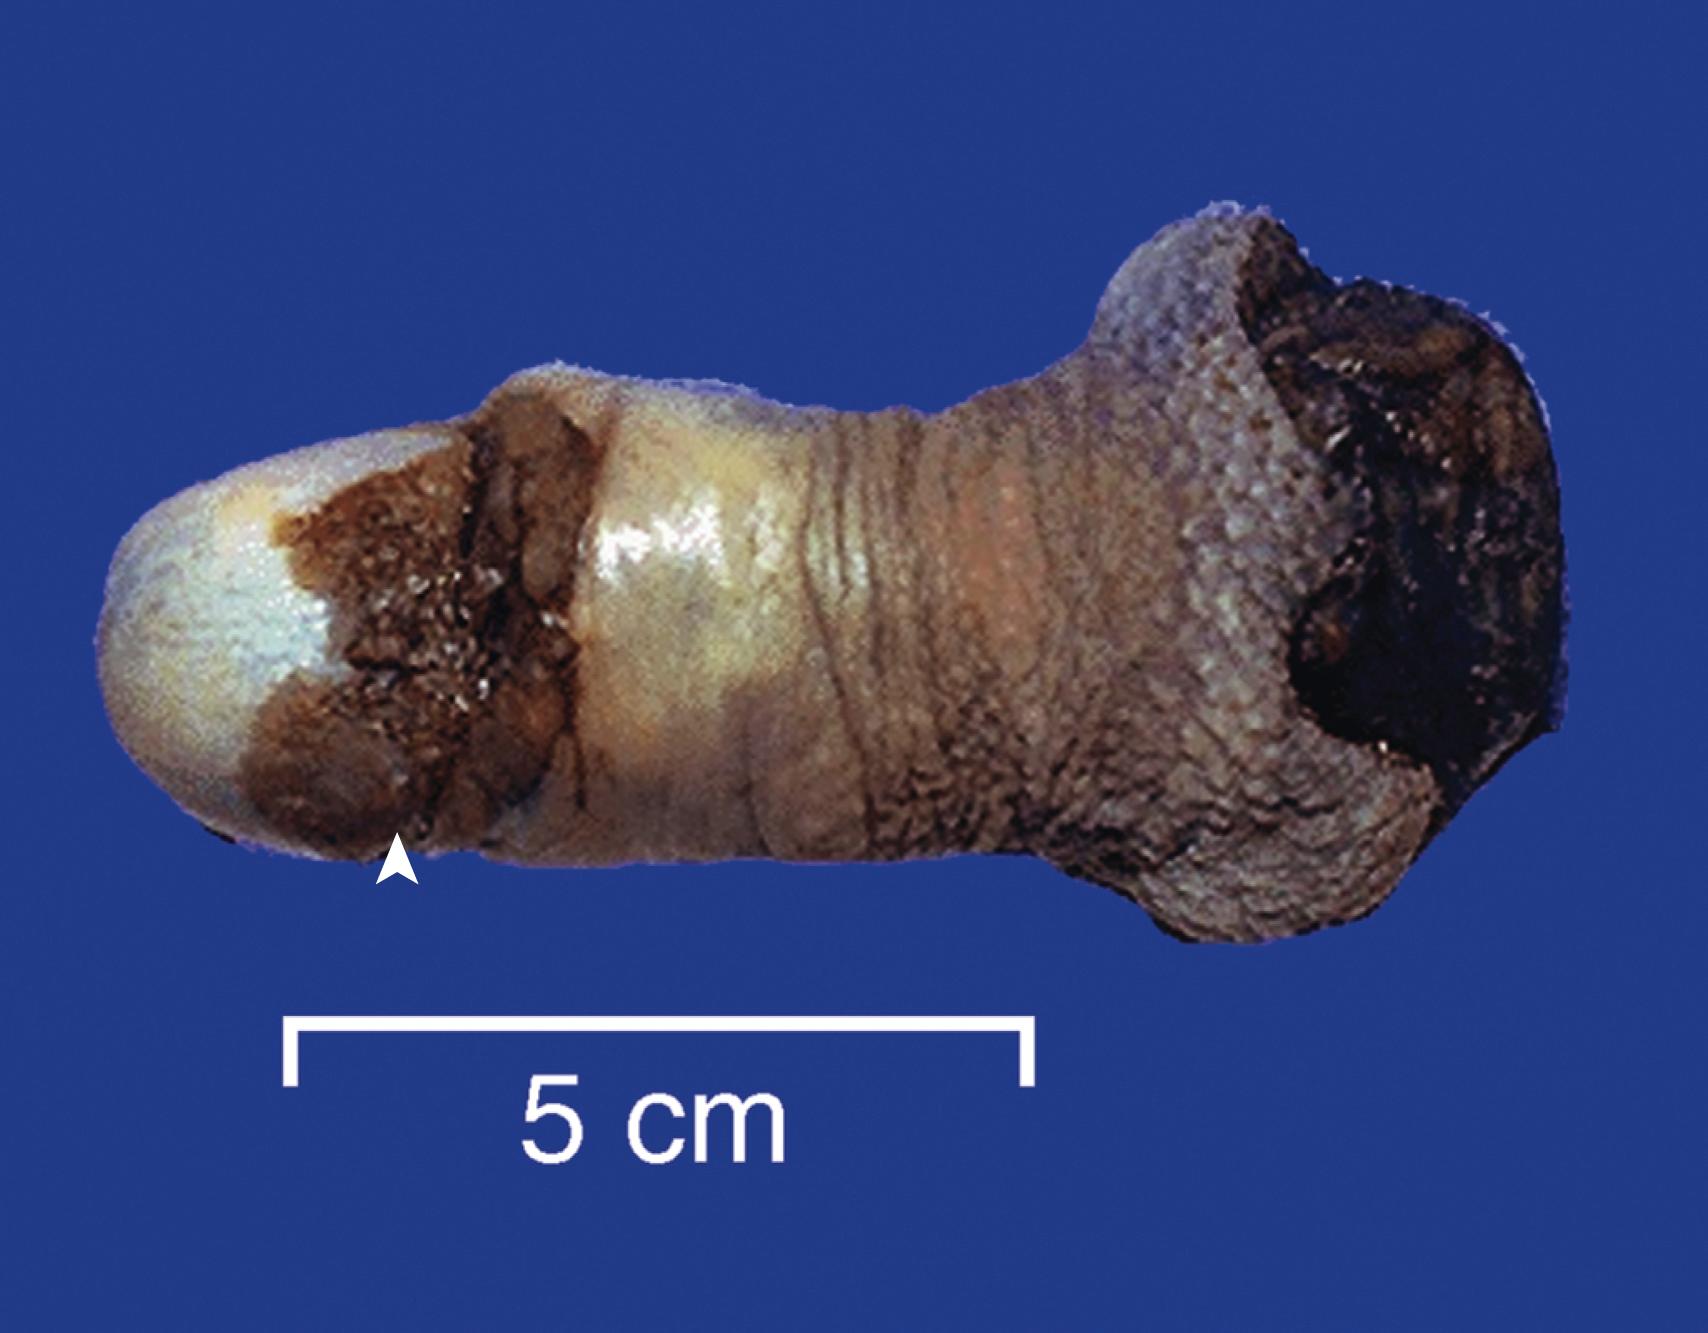 FIG. 16.2, Carcinoma of the penis. The glans penis is deformed by an ulcerated, infiltrative mass.